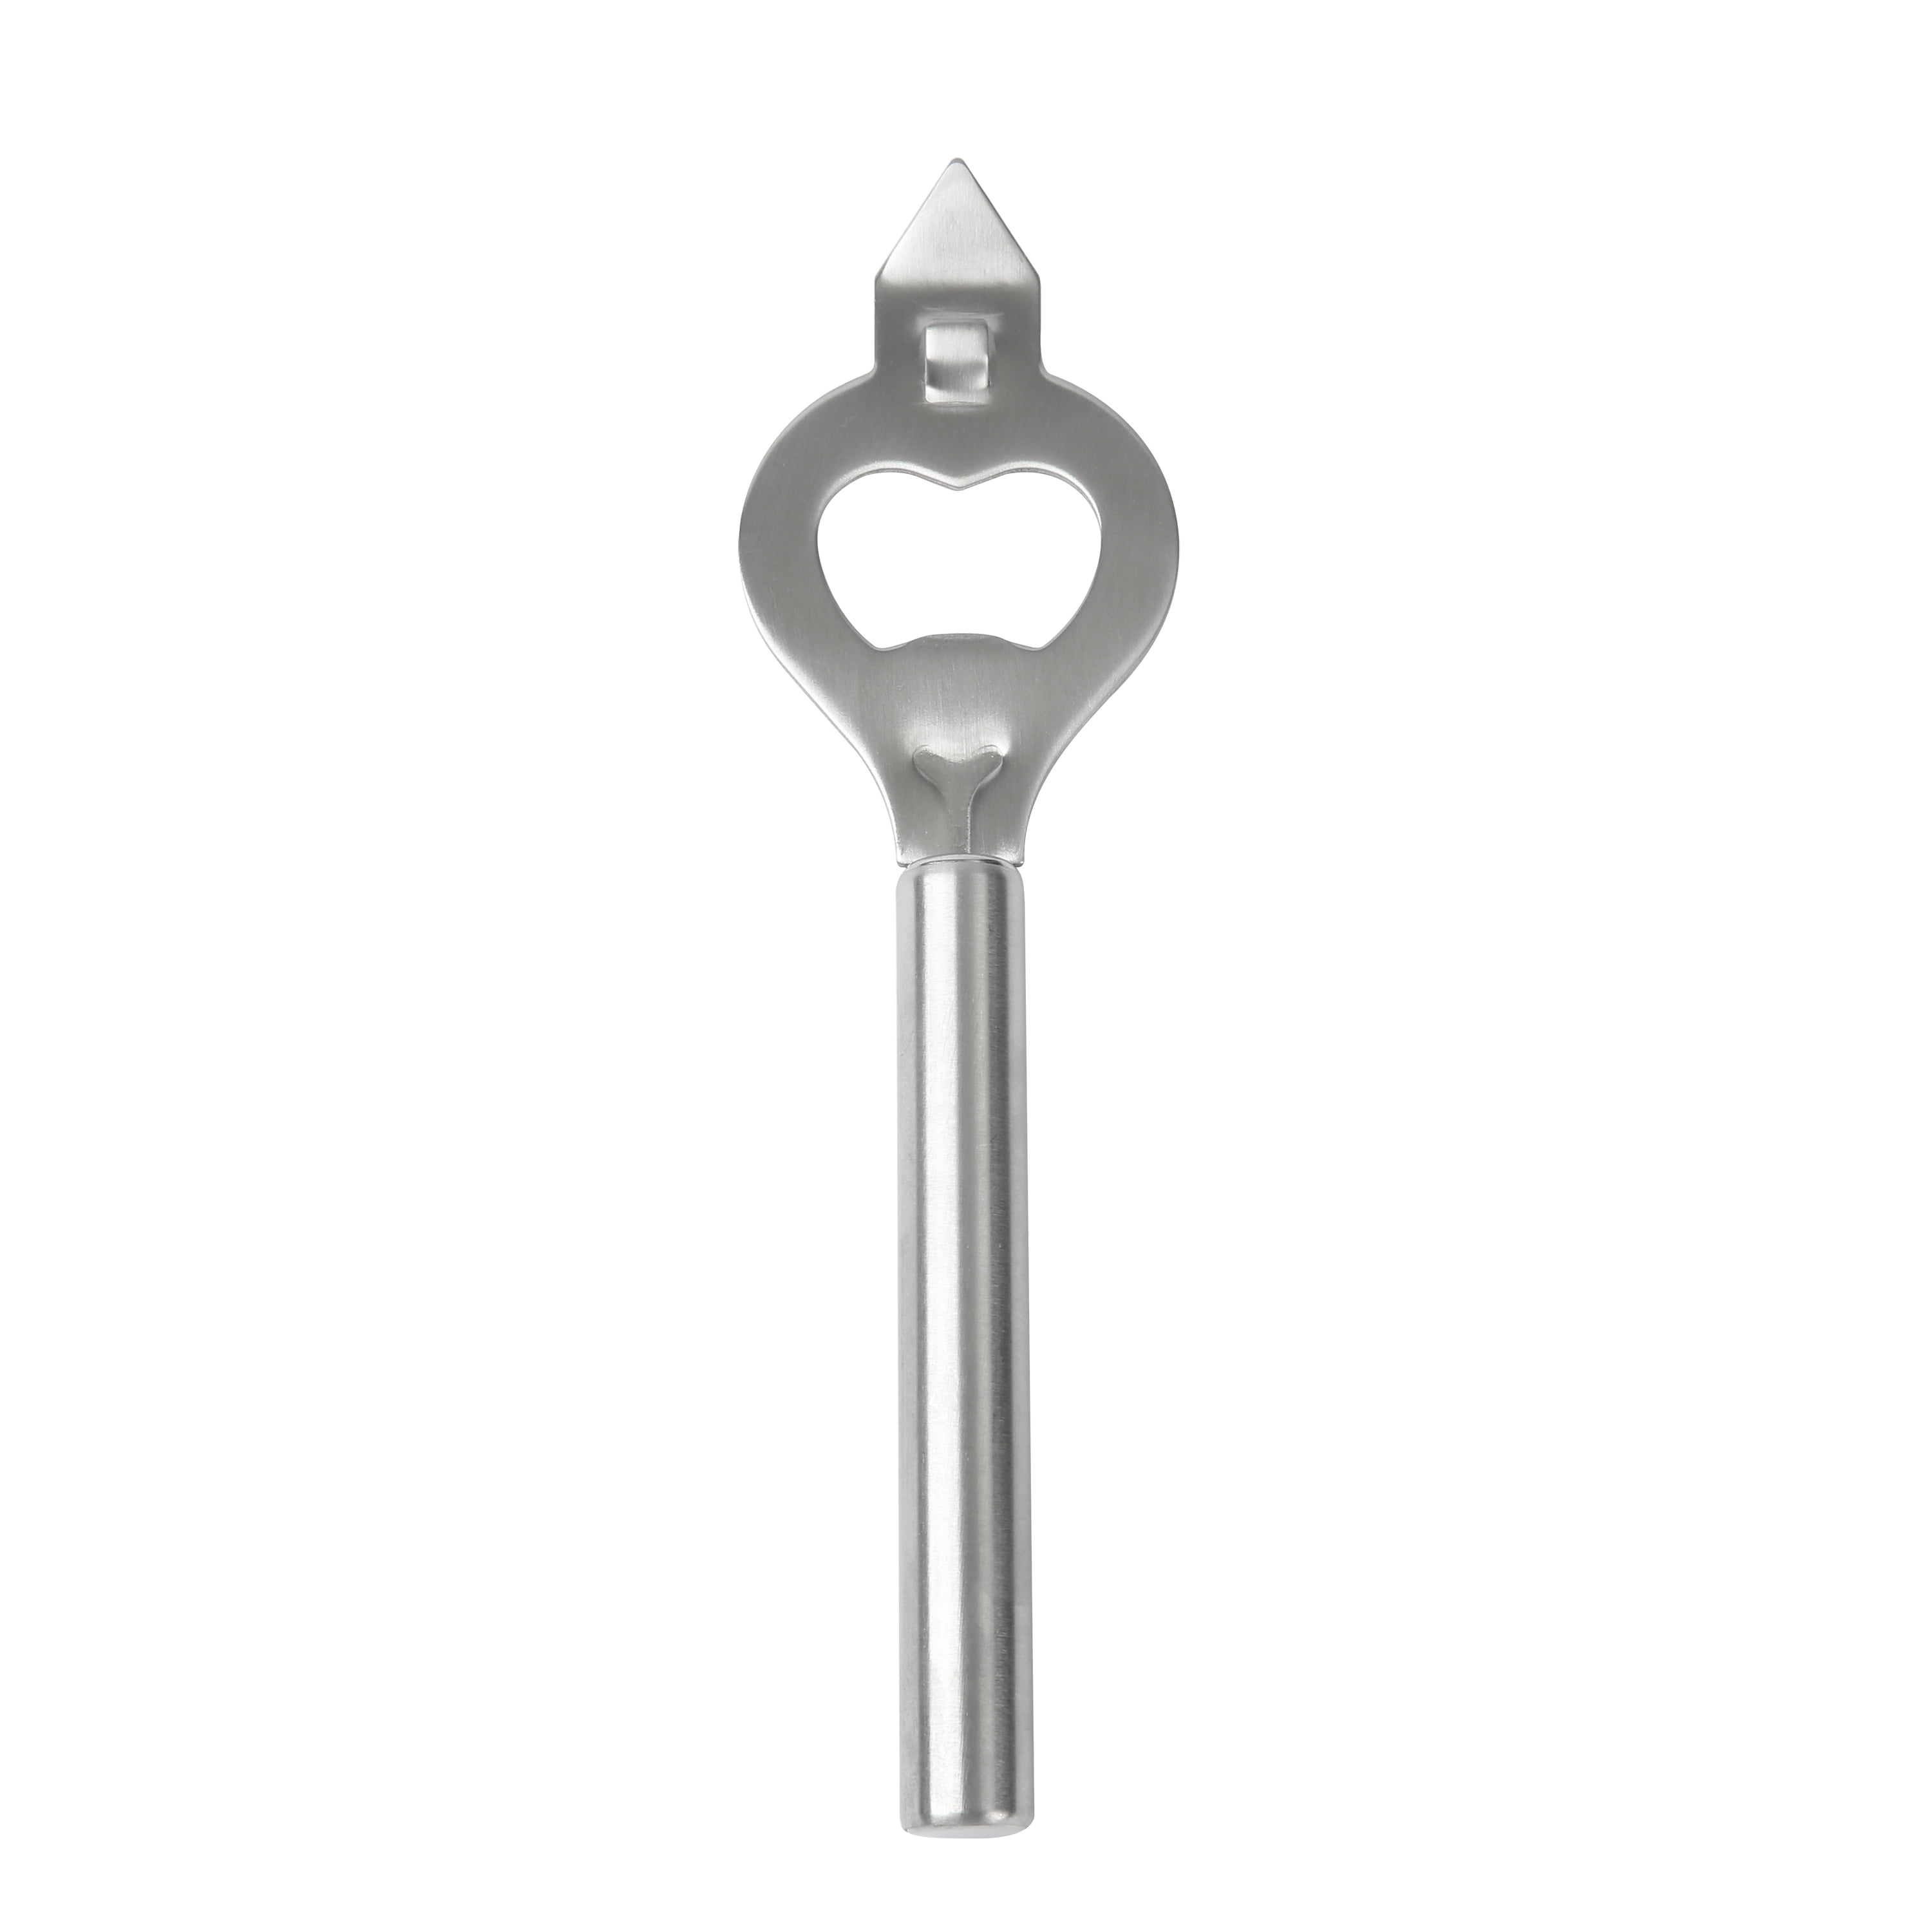 Choice 4 Church Key Can and Bottle Opener